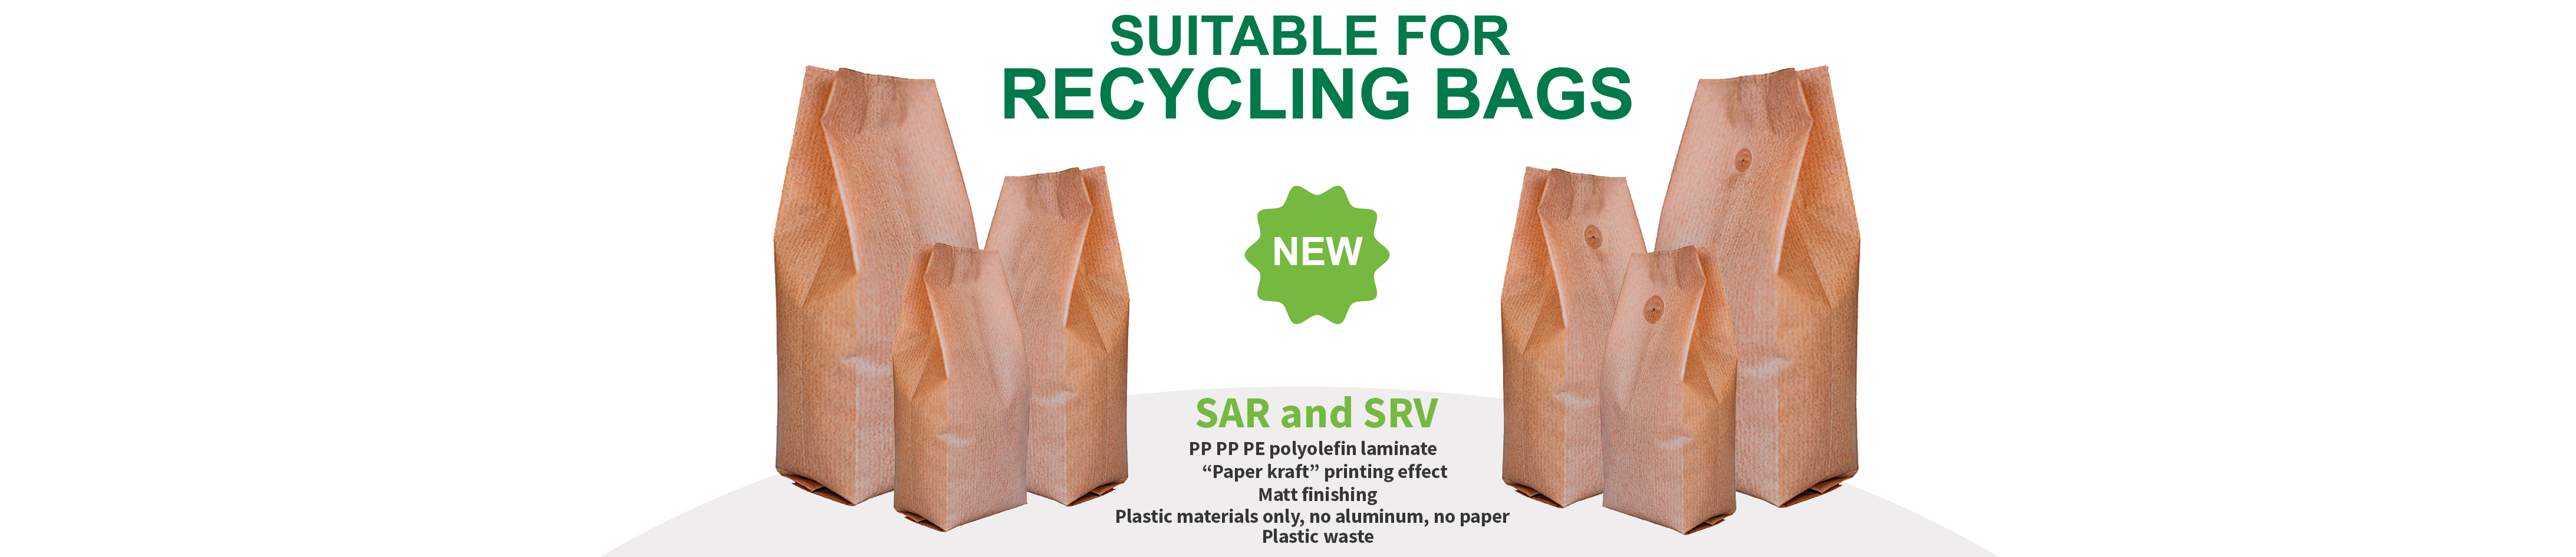 recyclable_bags_new.png